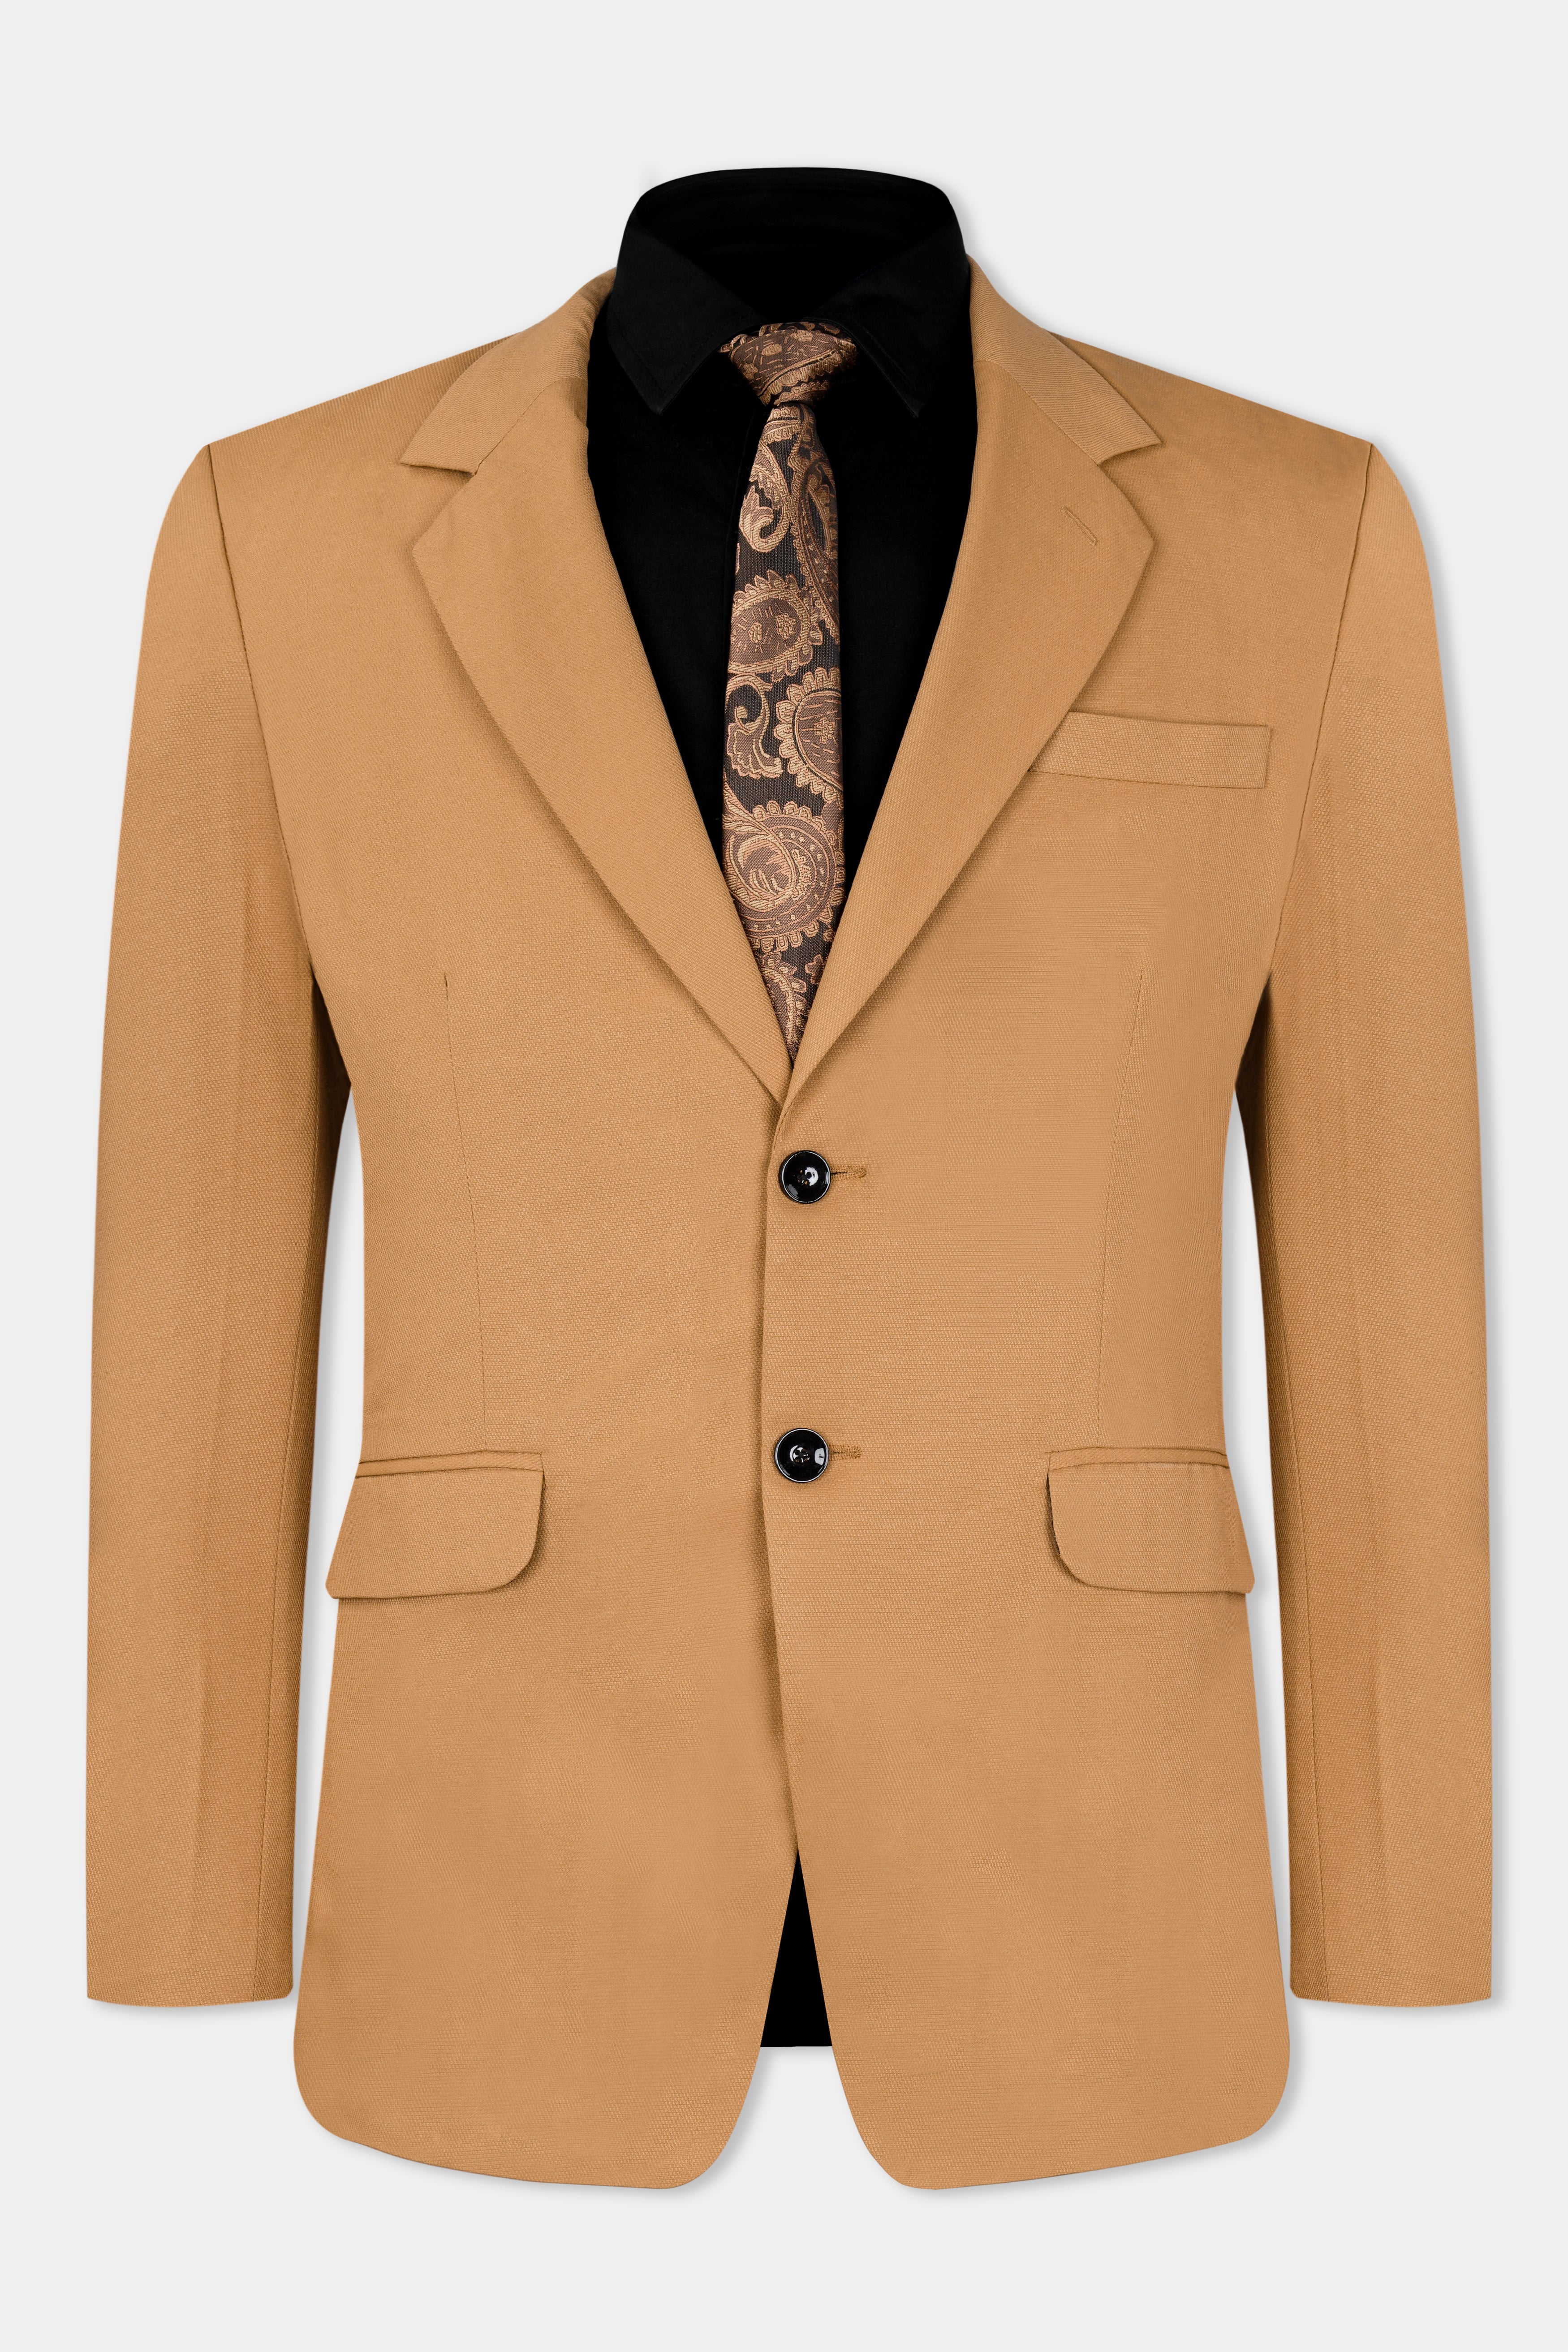 Twine Brown Dobby Textured Single Breasted Blazer BL2924-SB-36, BL2924-SB-38, BL2924-SB-40, BL2924-SB-42, BL2924-SB-44, BL2924-SB-46, BL2924-SB-48, BL2924-SB-50, BL2924-SB-52, BL2924-SB-54, BL2924-SB-56, BL2924-SB-58, BL2924-SB-60